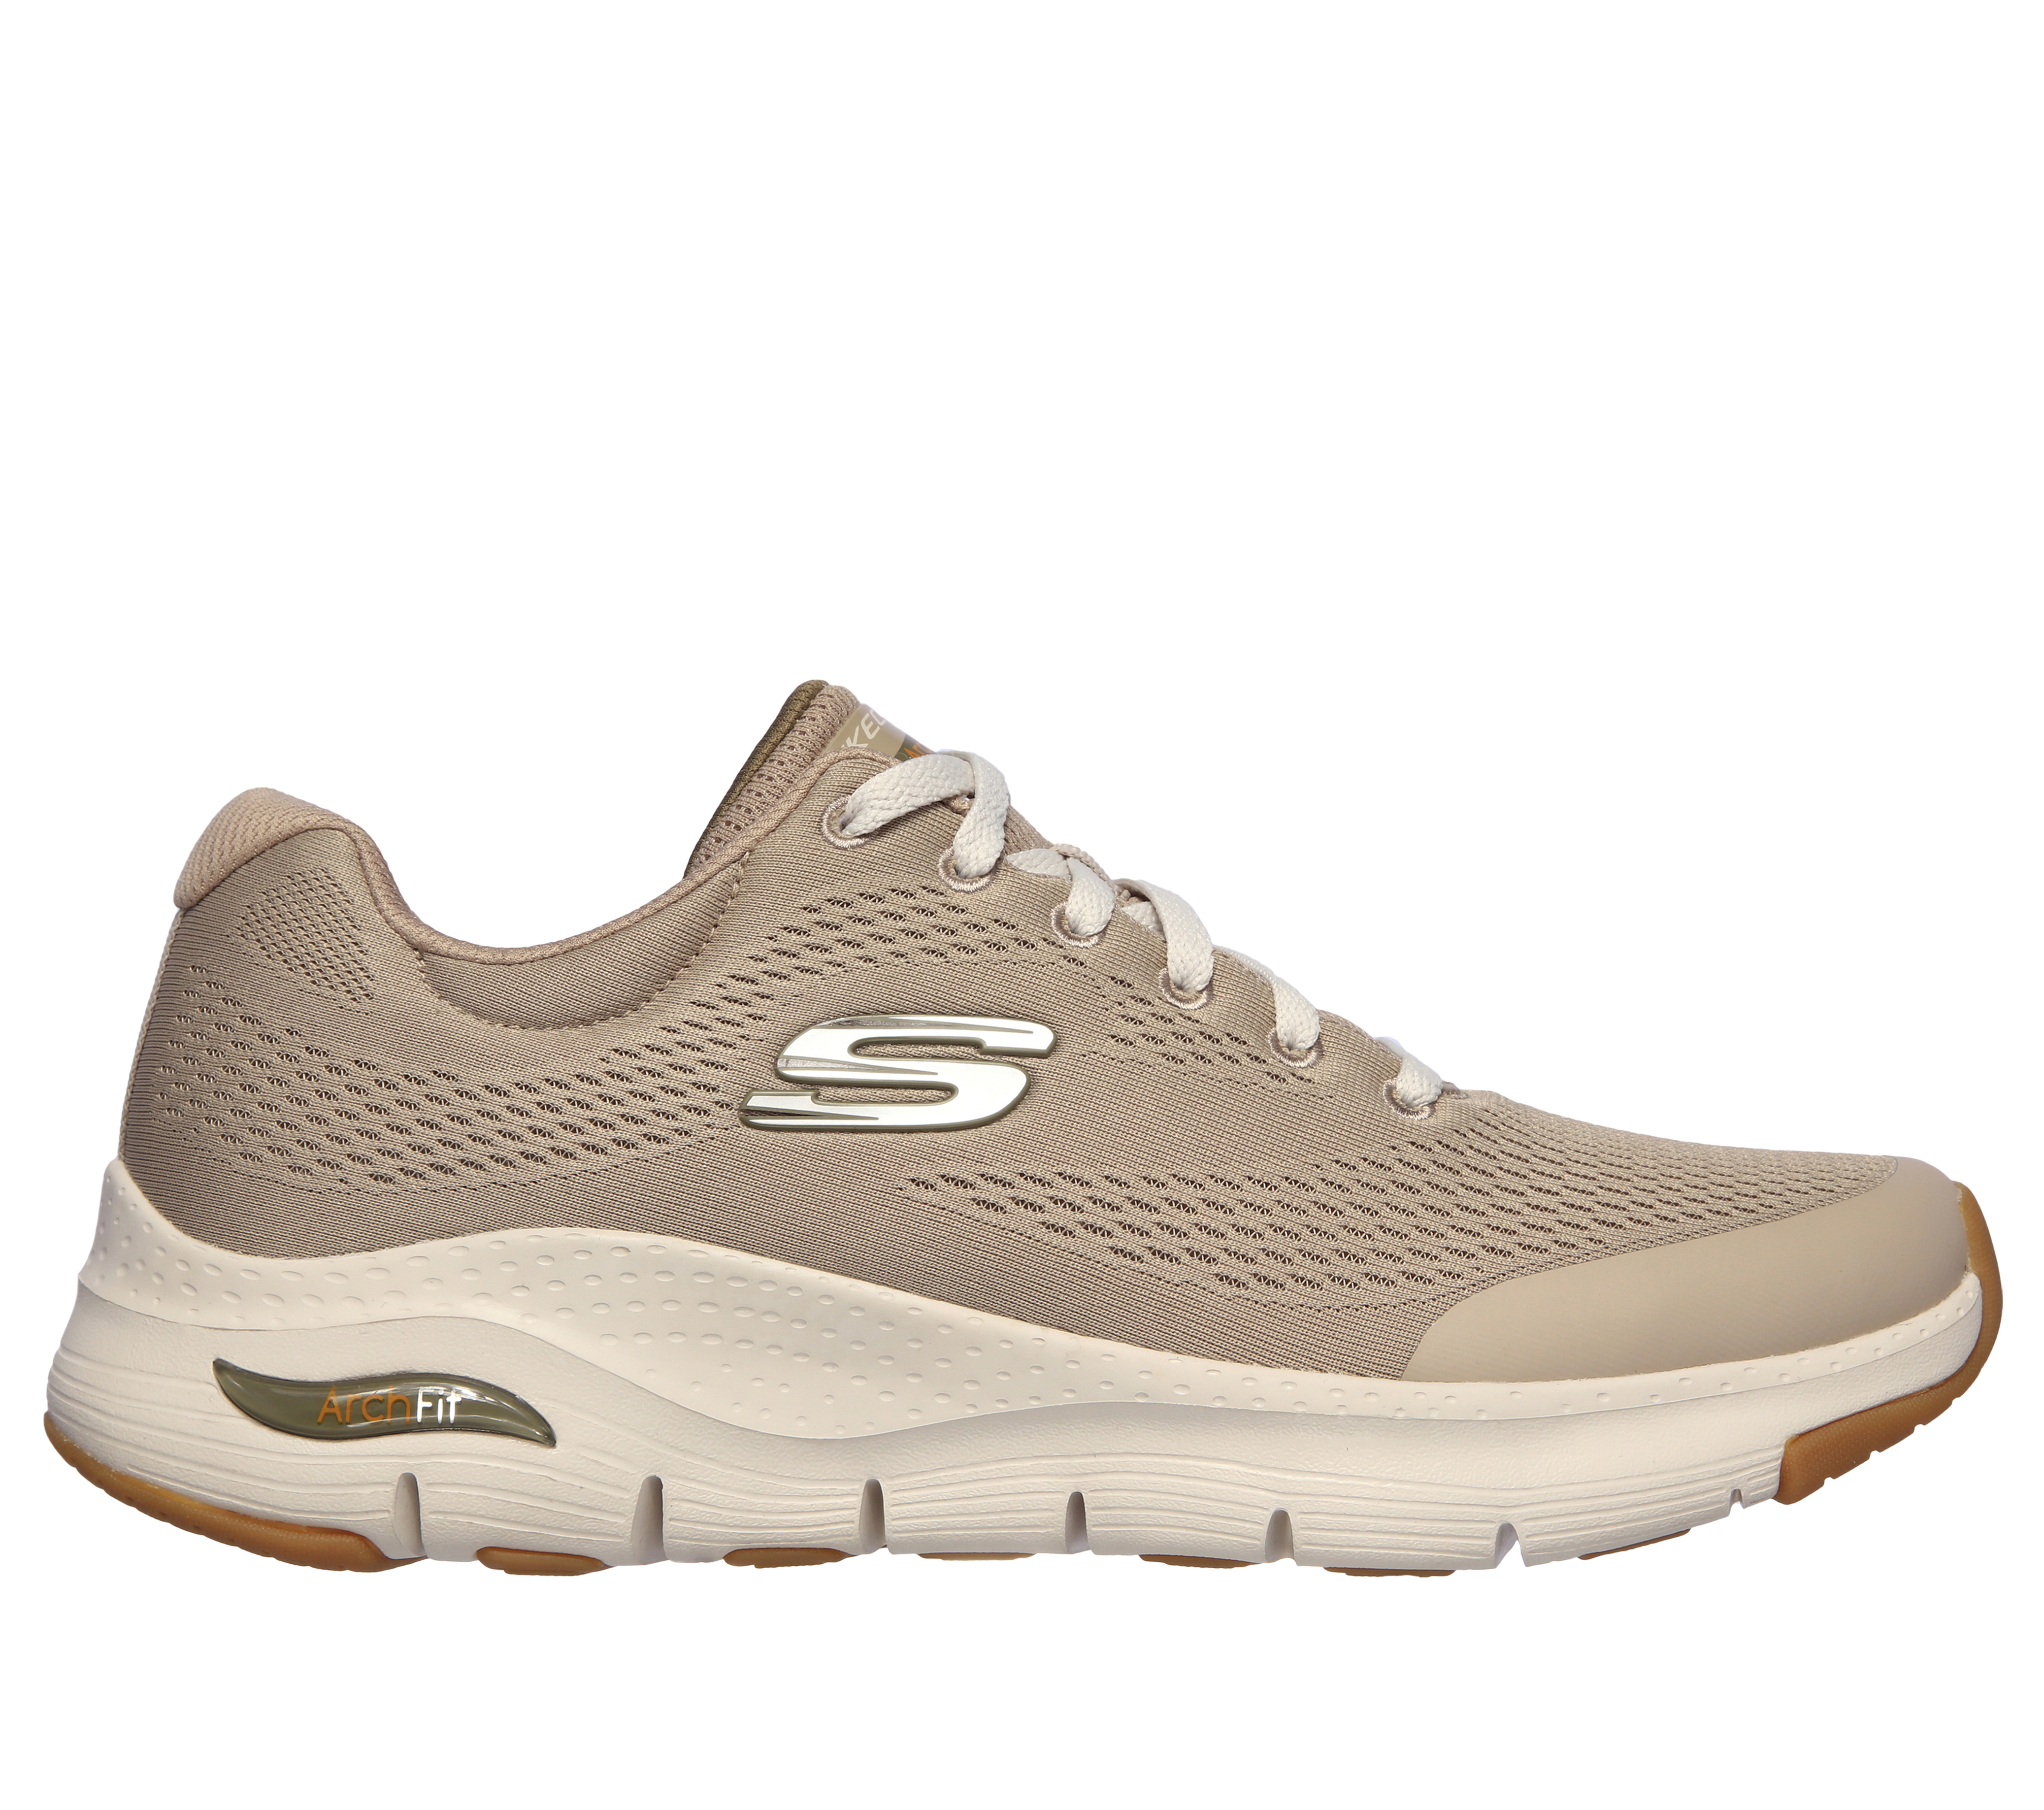 where can i find skechers shoes